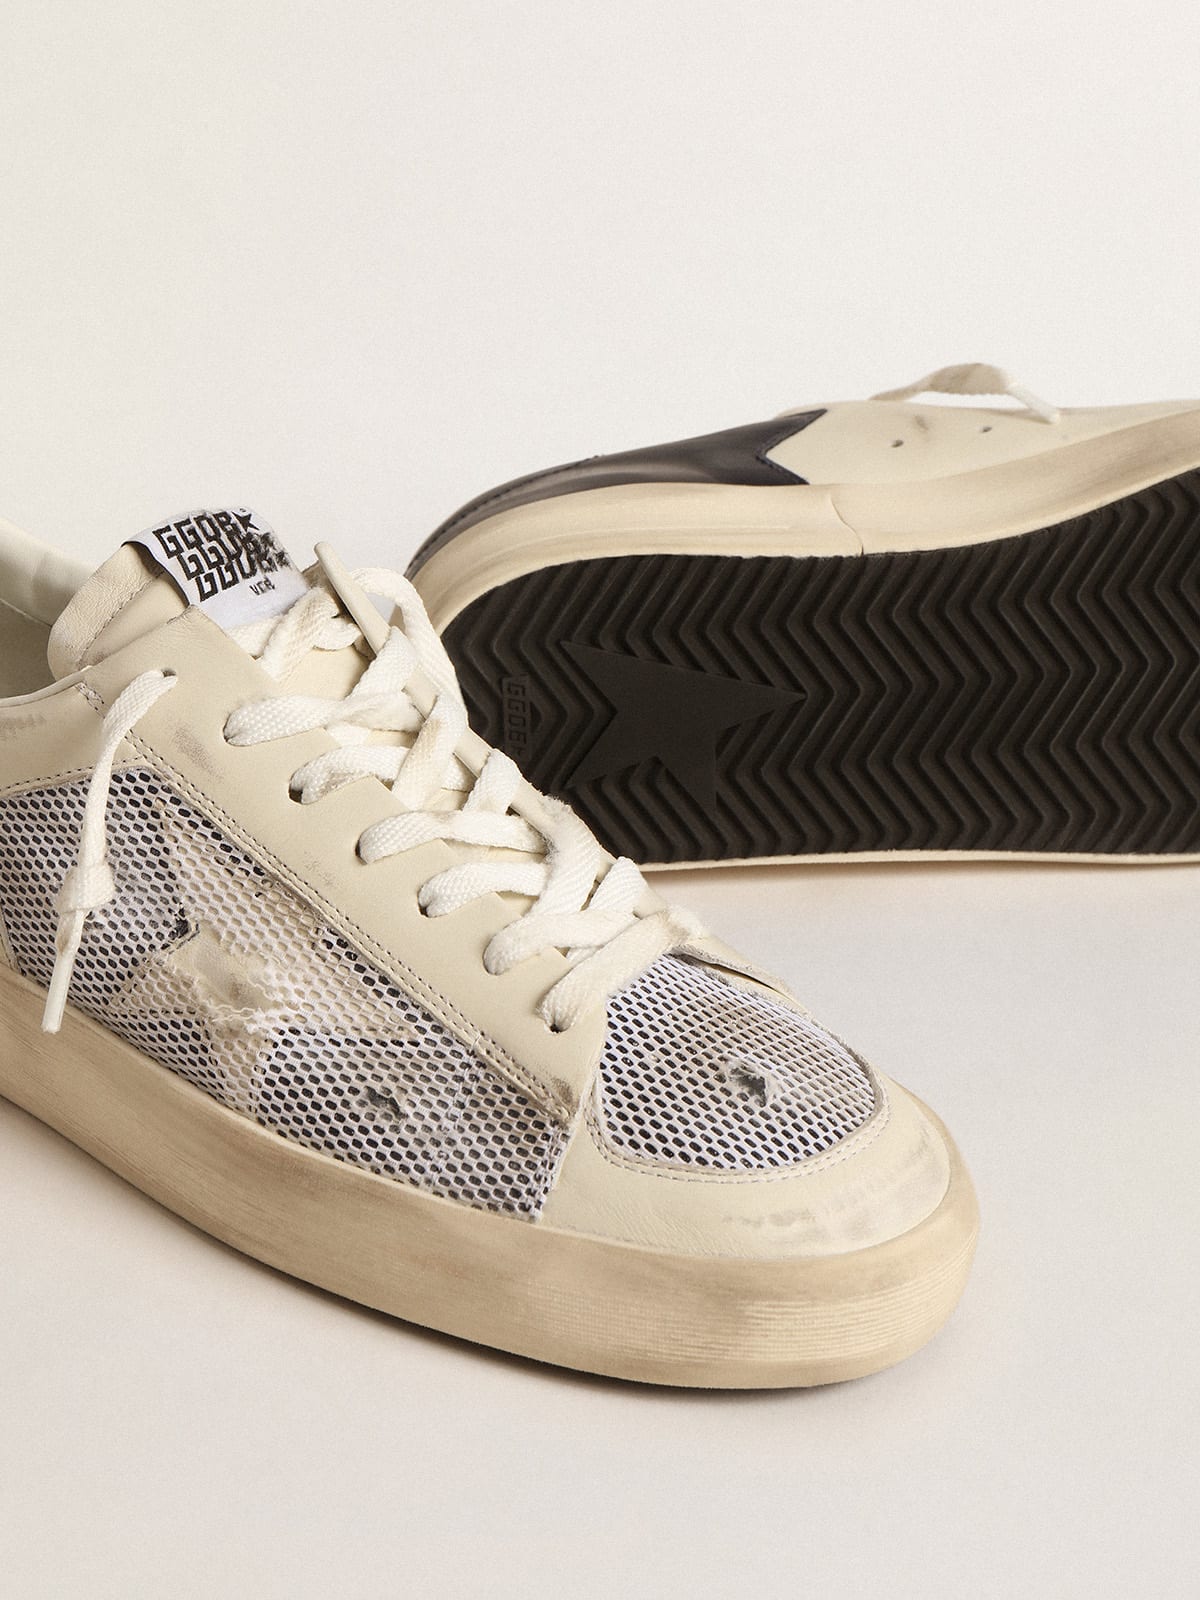 Golden Goose - Stardan in white leather and mesh with blue metallic heel tab in 